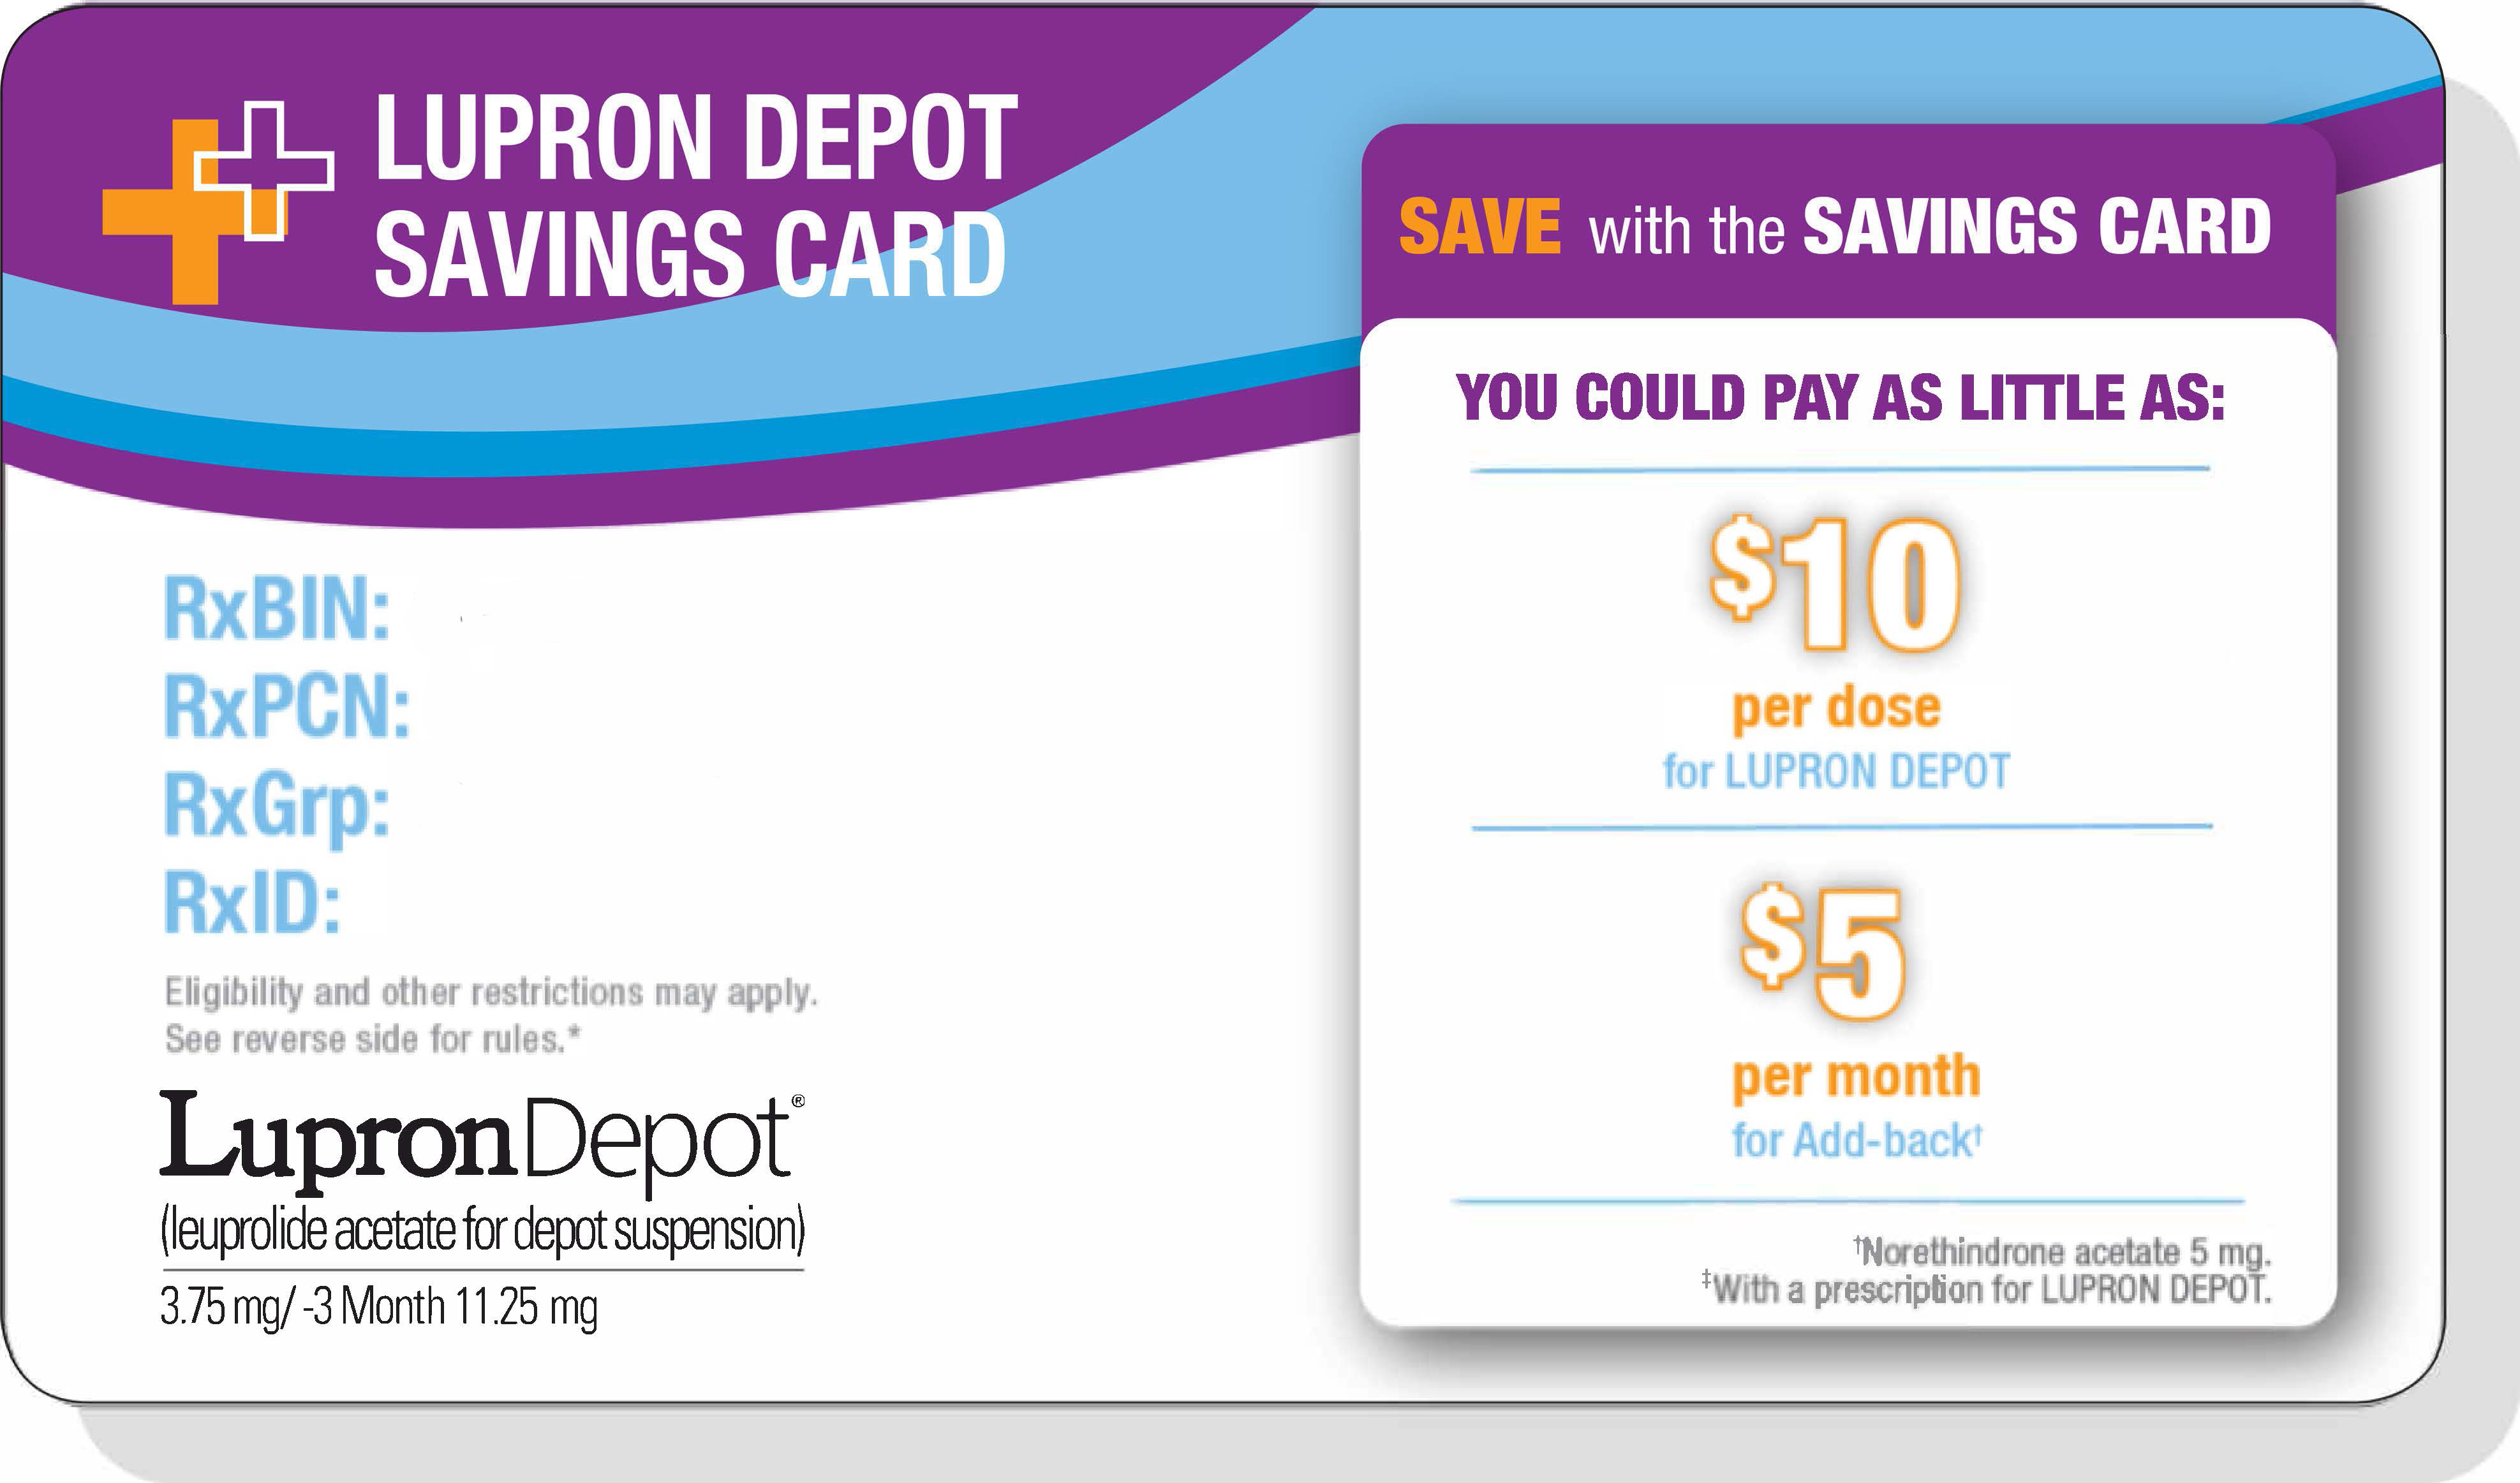 Savings card for patients with endometriosis